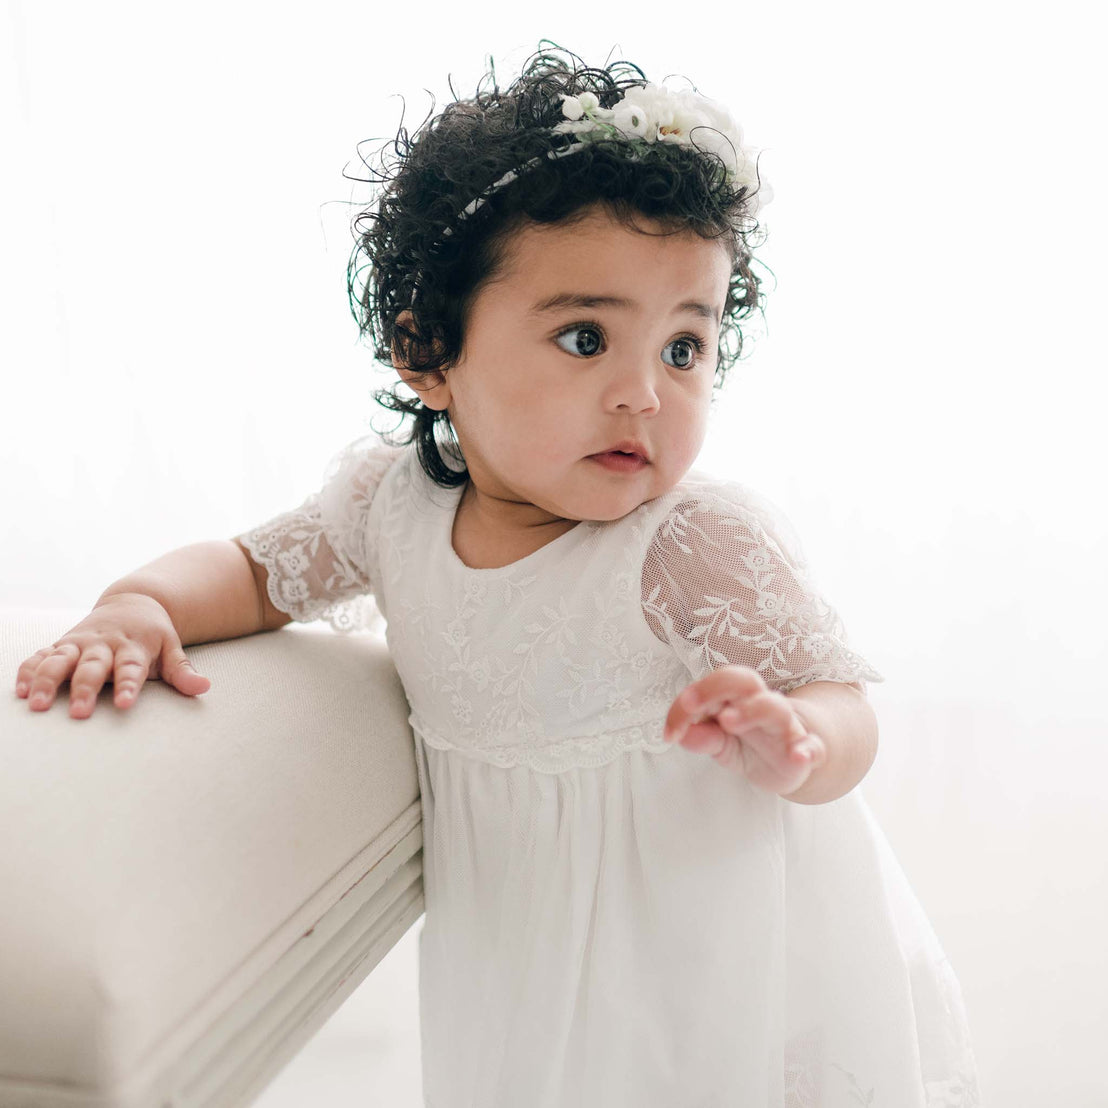 A toddler with curly hair wearing a light ivory Ella Romper Dress and a flower headband stands leaning on a cushioned chair. The background is softly lit, creating a bright, airy atmosphere. The child looks to the side with a curious expression.